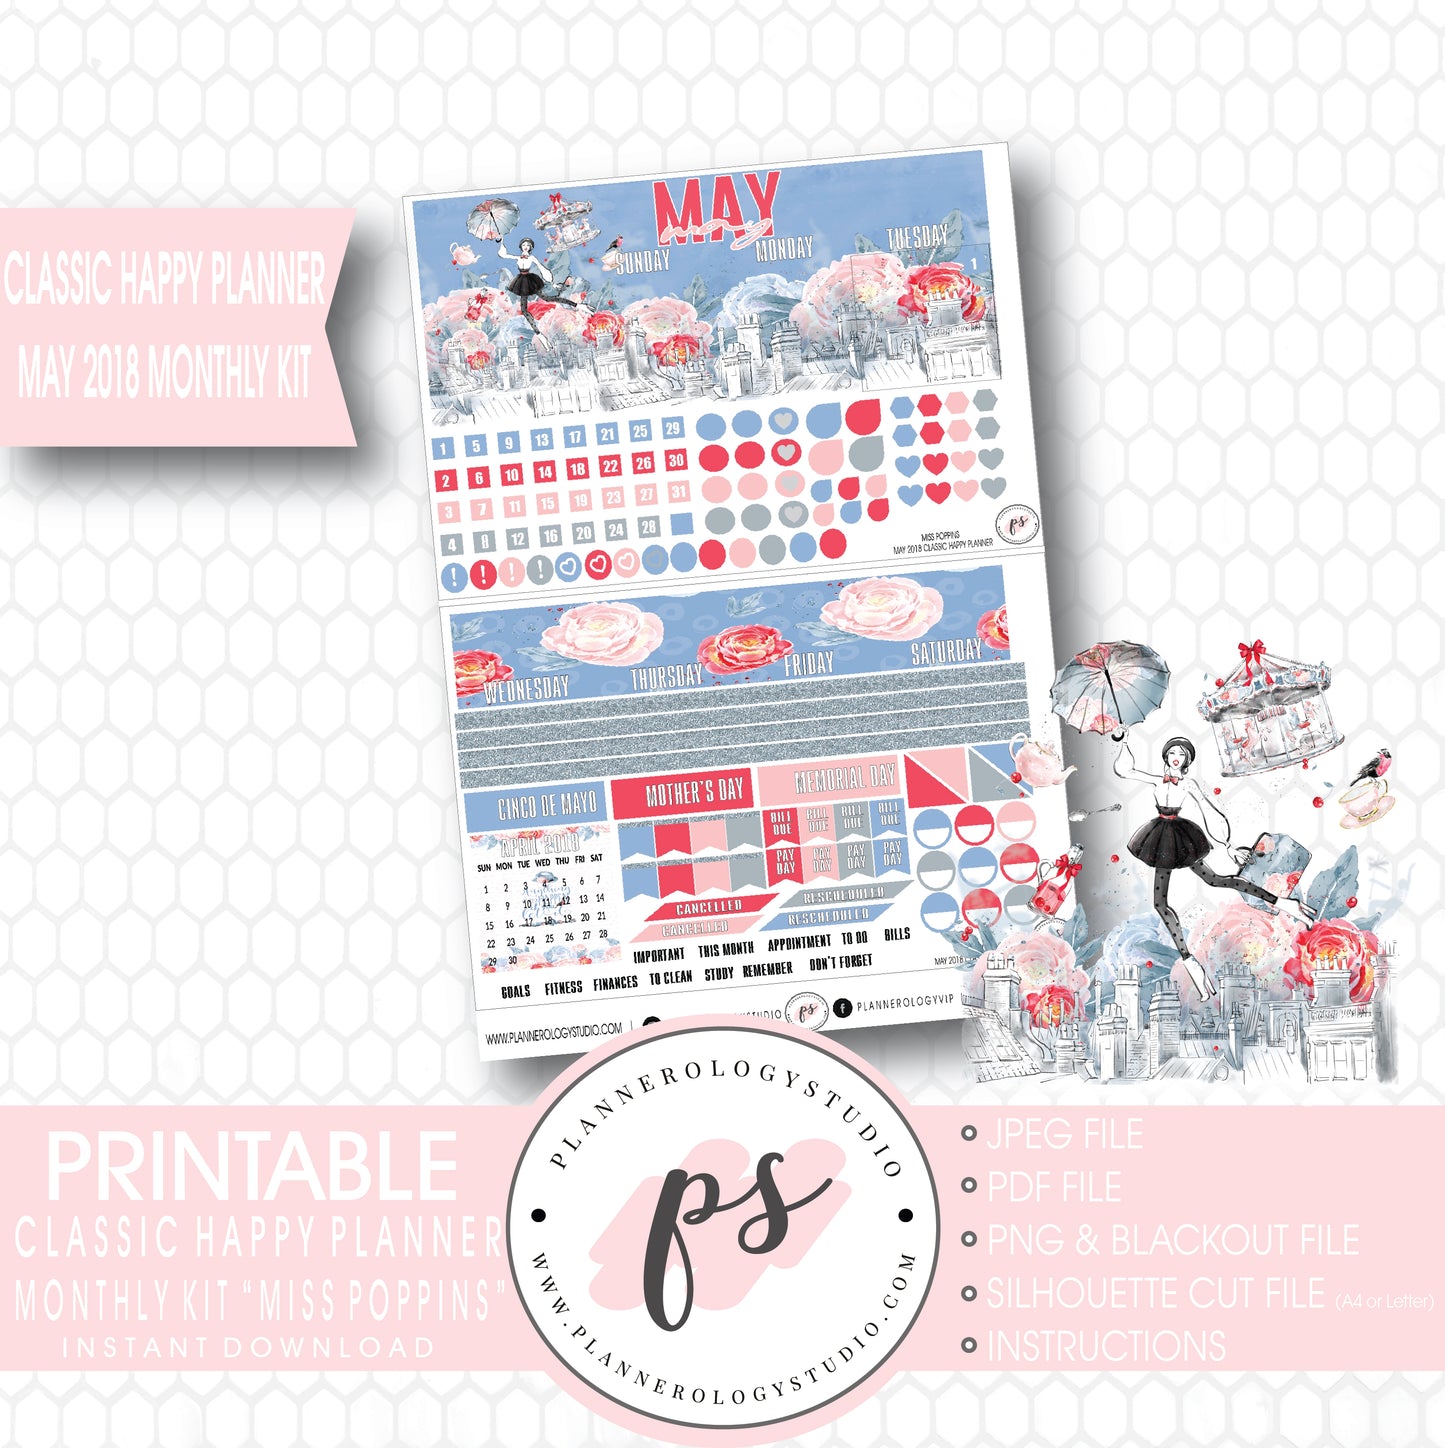 Miss Poppins (Mary Poppins) May 2018 Monthly View Kit Digital Printable Planner Stickers (for use with Classic Happy Planner) - Plannerologystudio